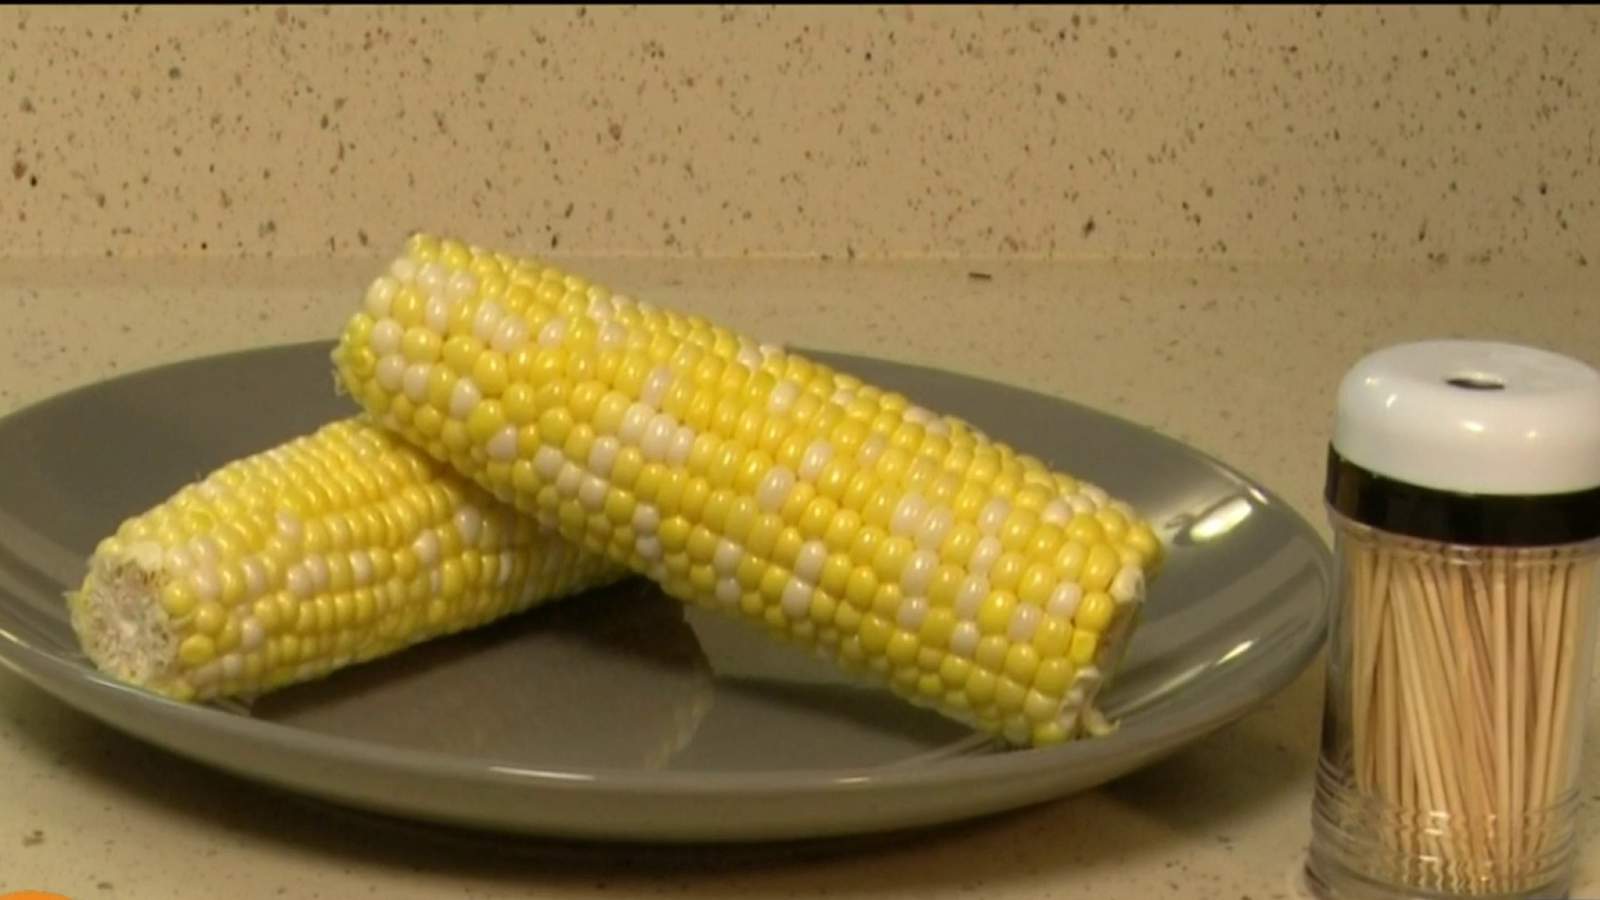 Pick  your corn off the cob before you eat it?